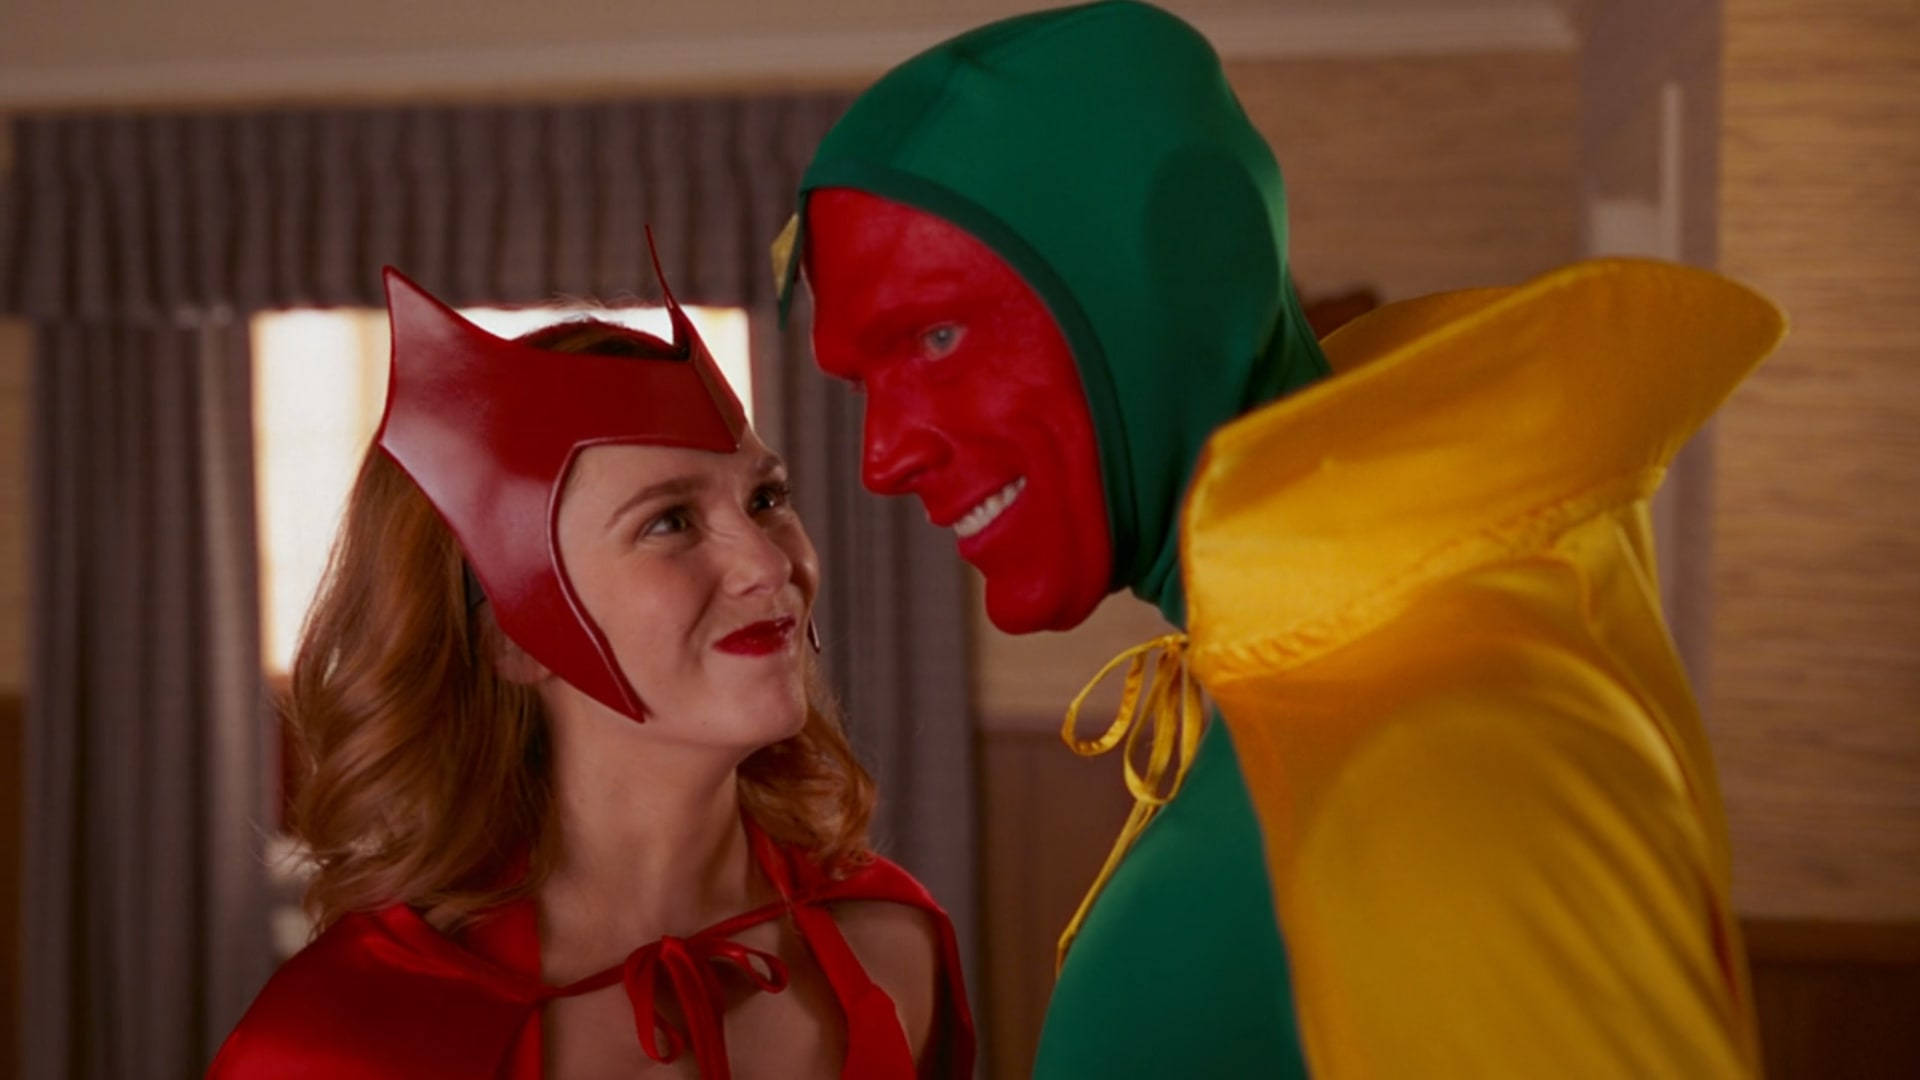 Wanda And Vision In Halloween Costumes